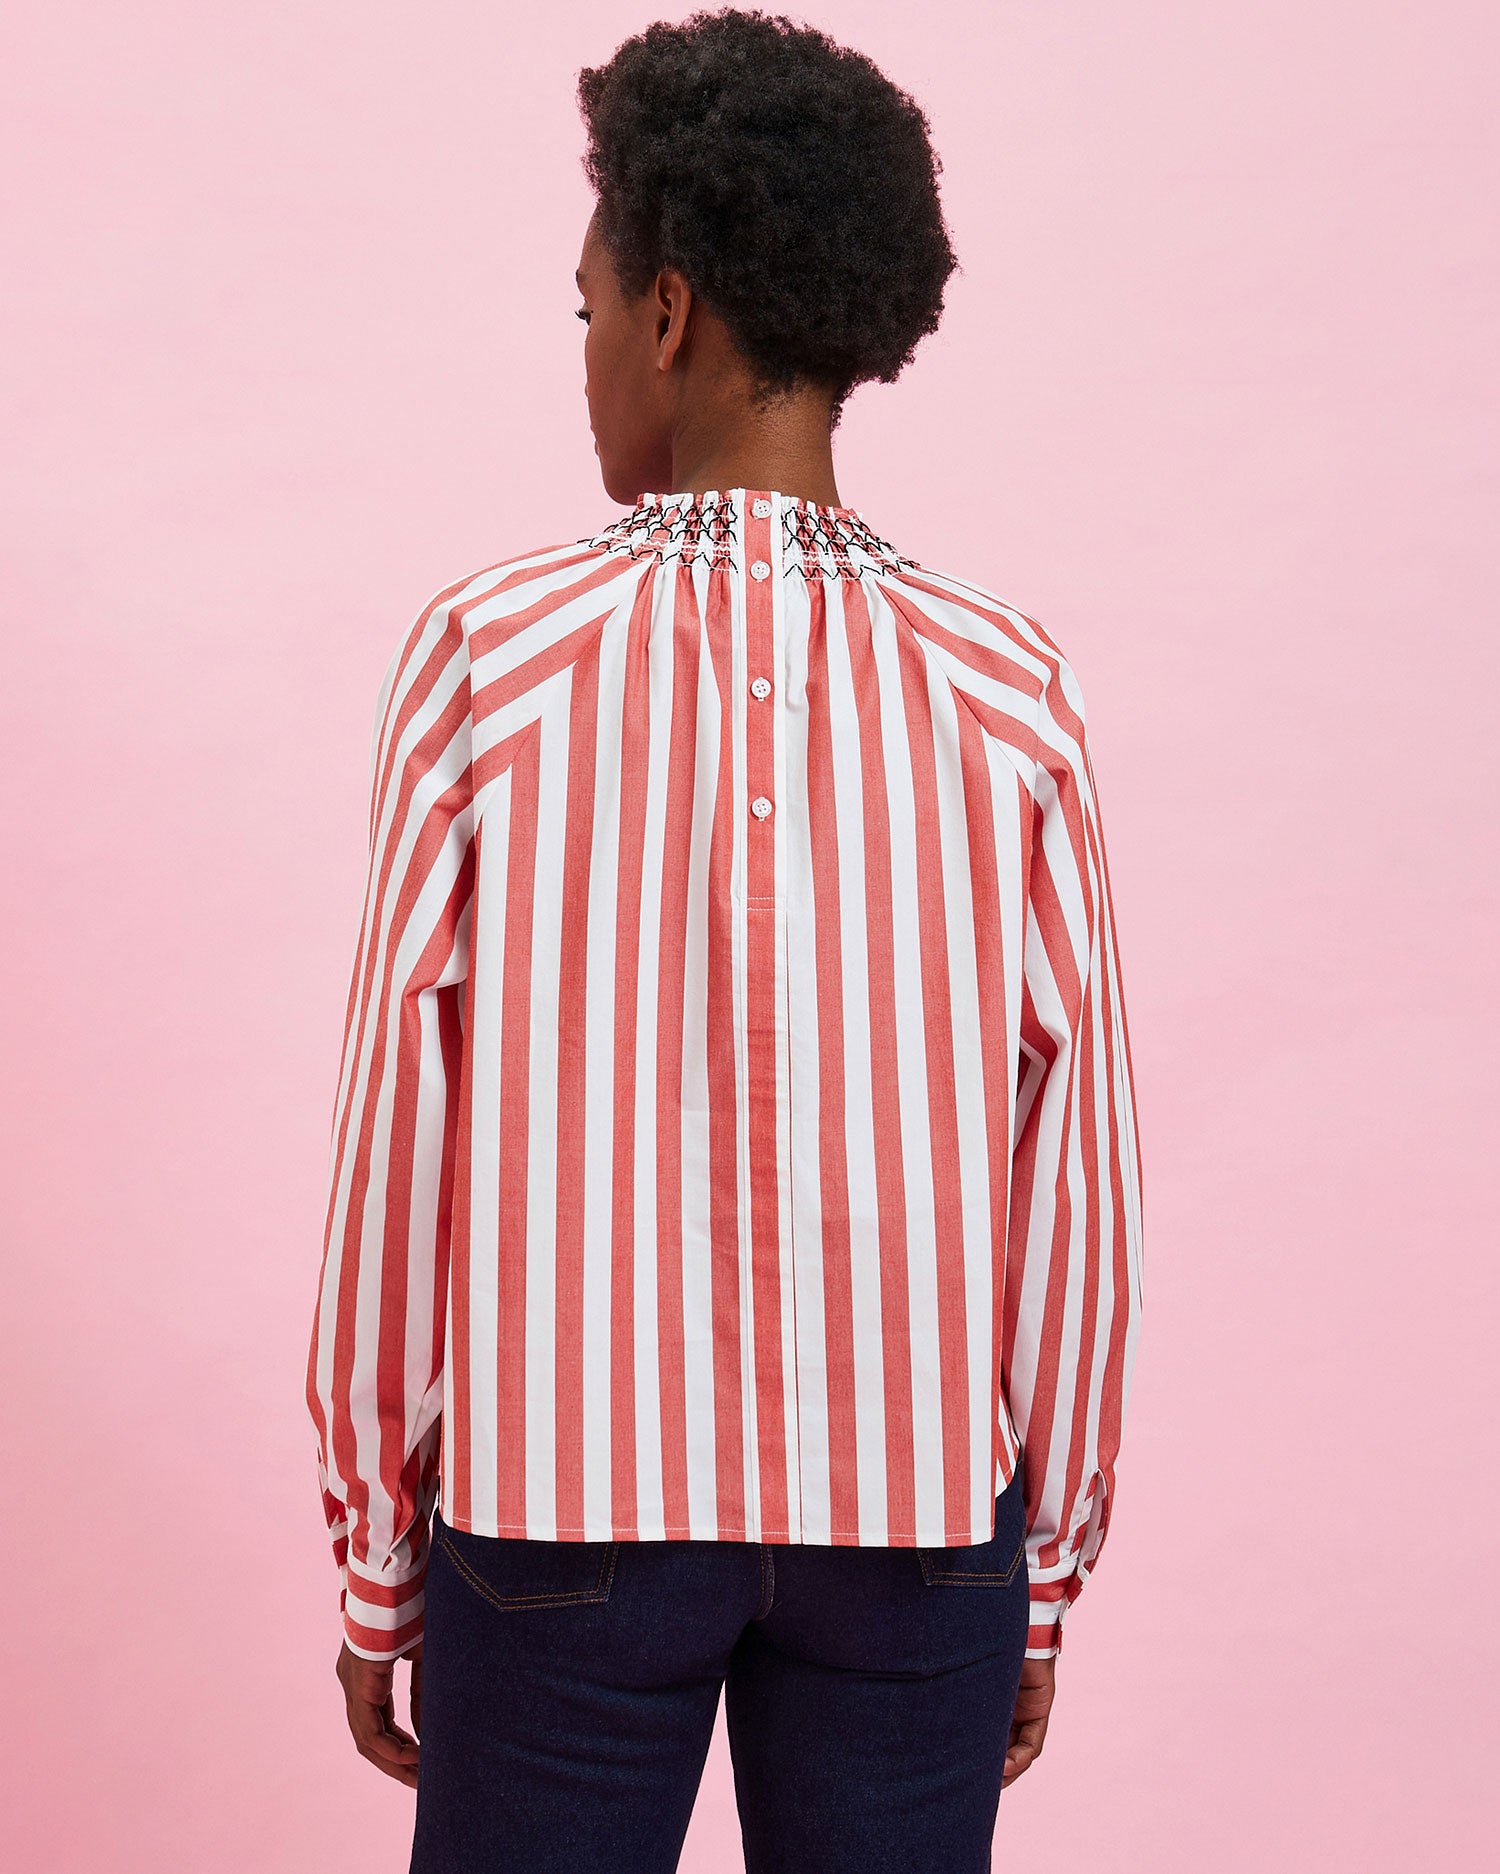 back view of the model wearing the Poppy & Cream Stripes Blouse with jeans